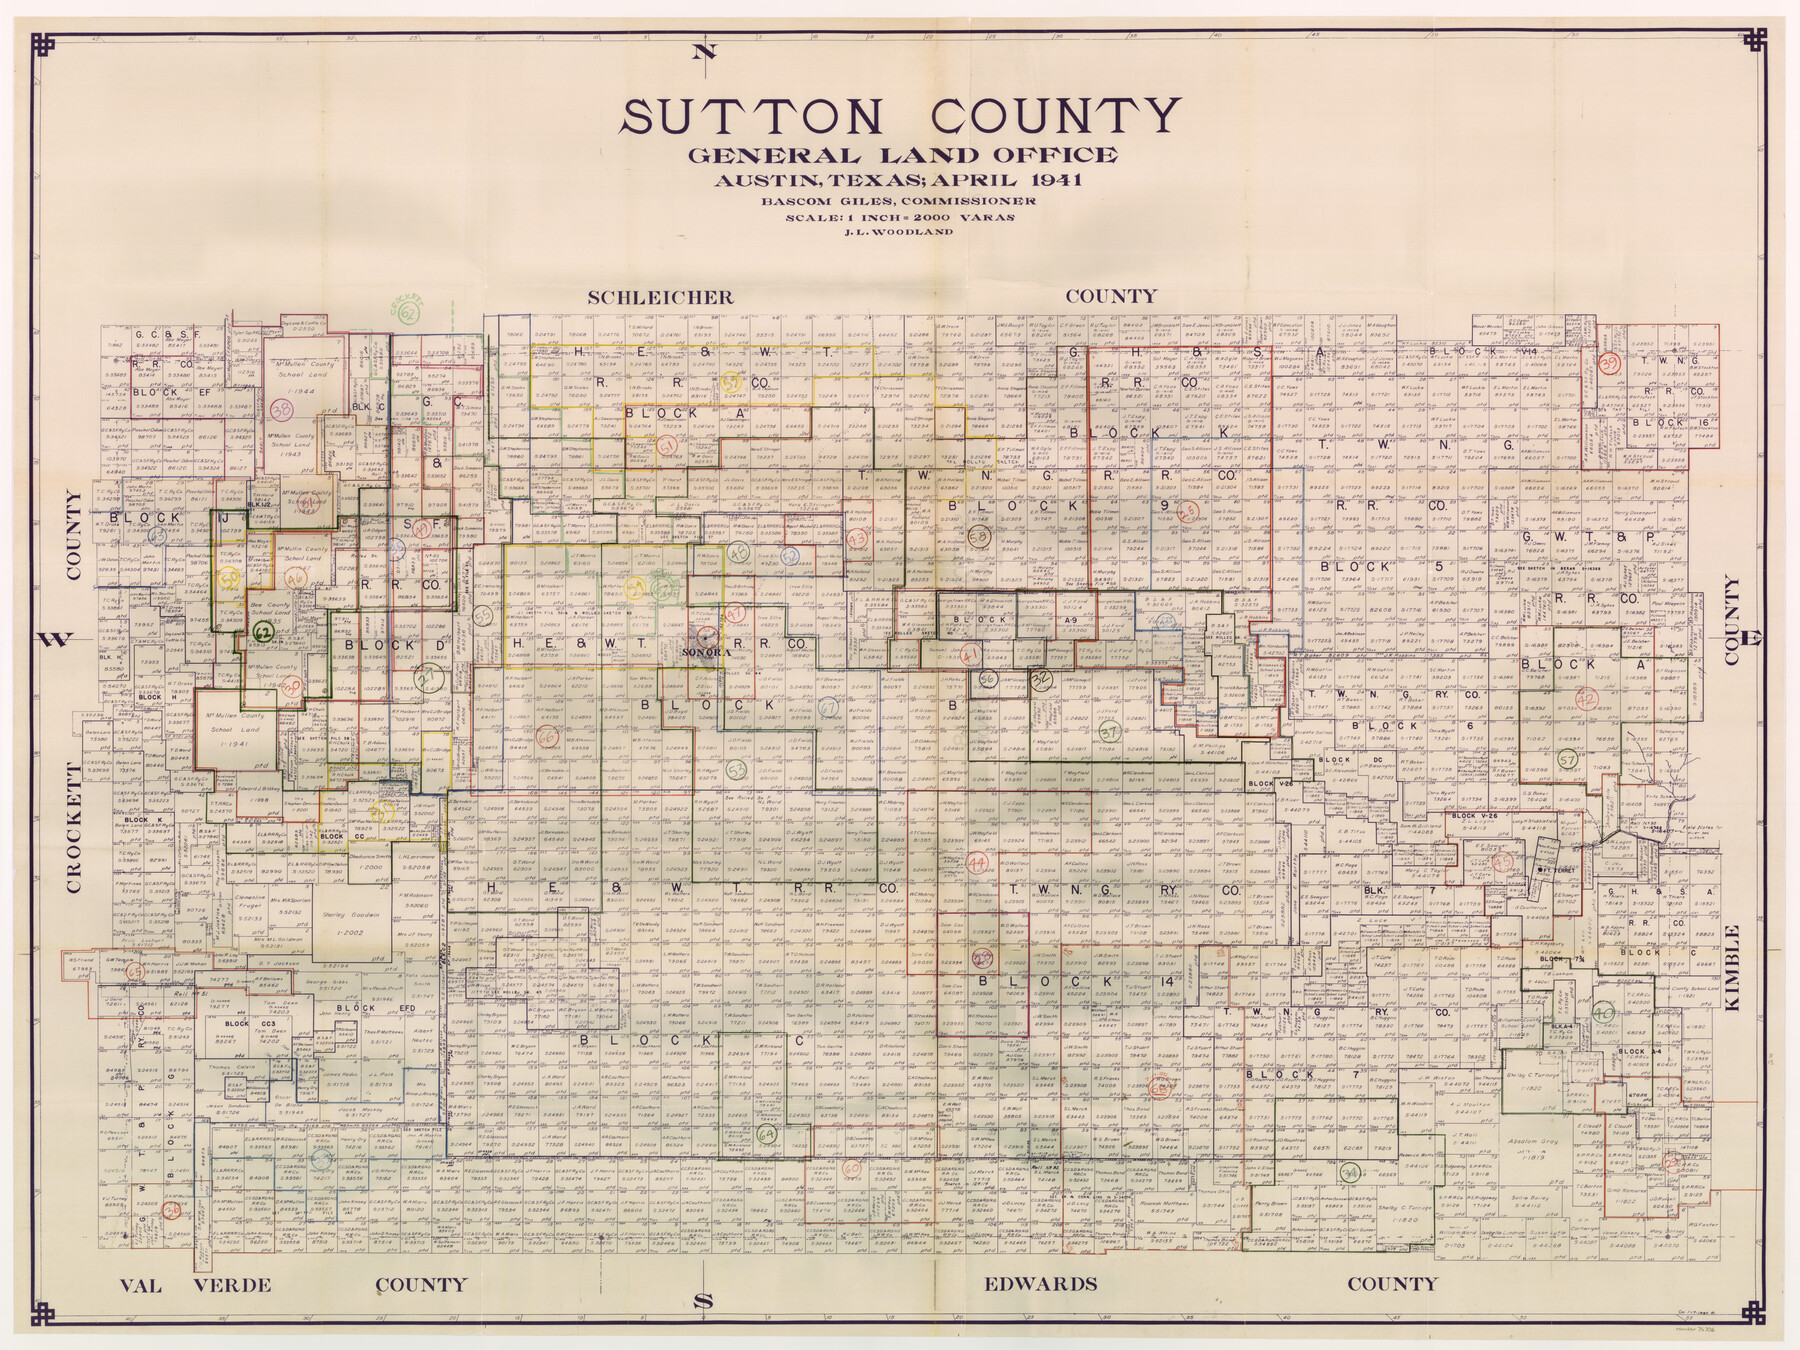 76706, Sutton County Working Sketch Graphic Index, Sheet 2 (Sketches 25 to Most Recent), General Map Collection